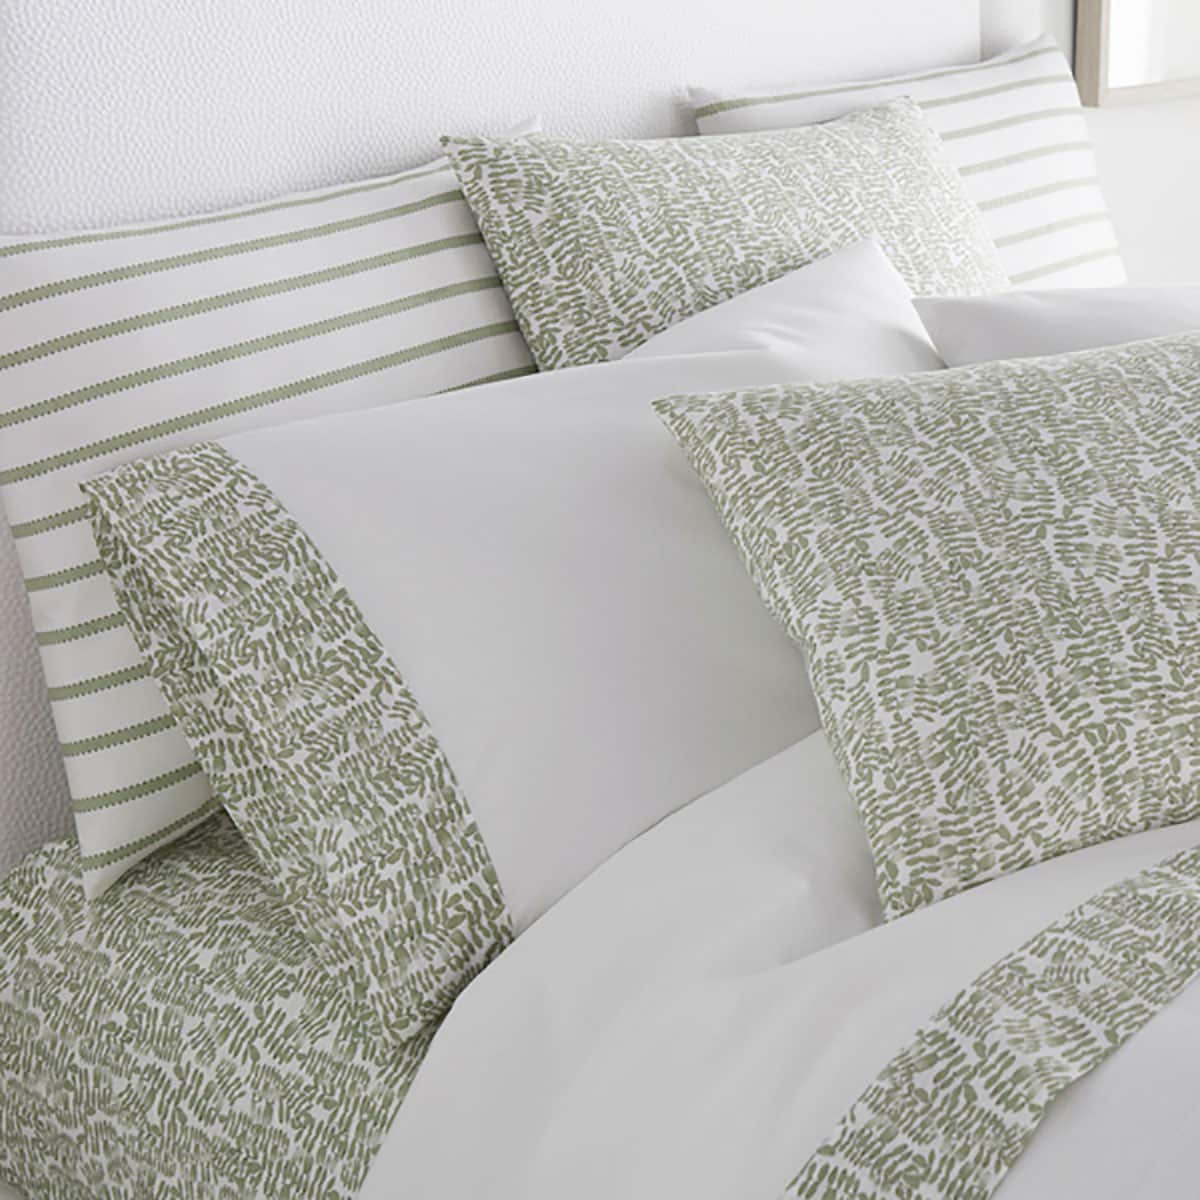 Ultimate Guide To The Best Bedding - Where To Buy The Best Luxury Sheets